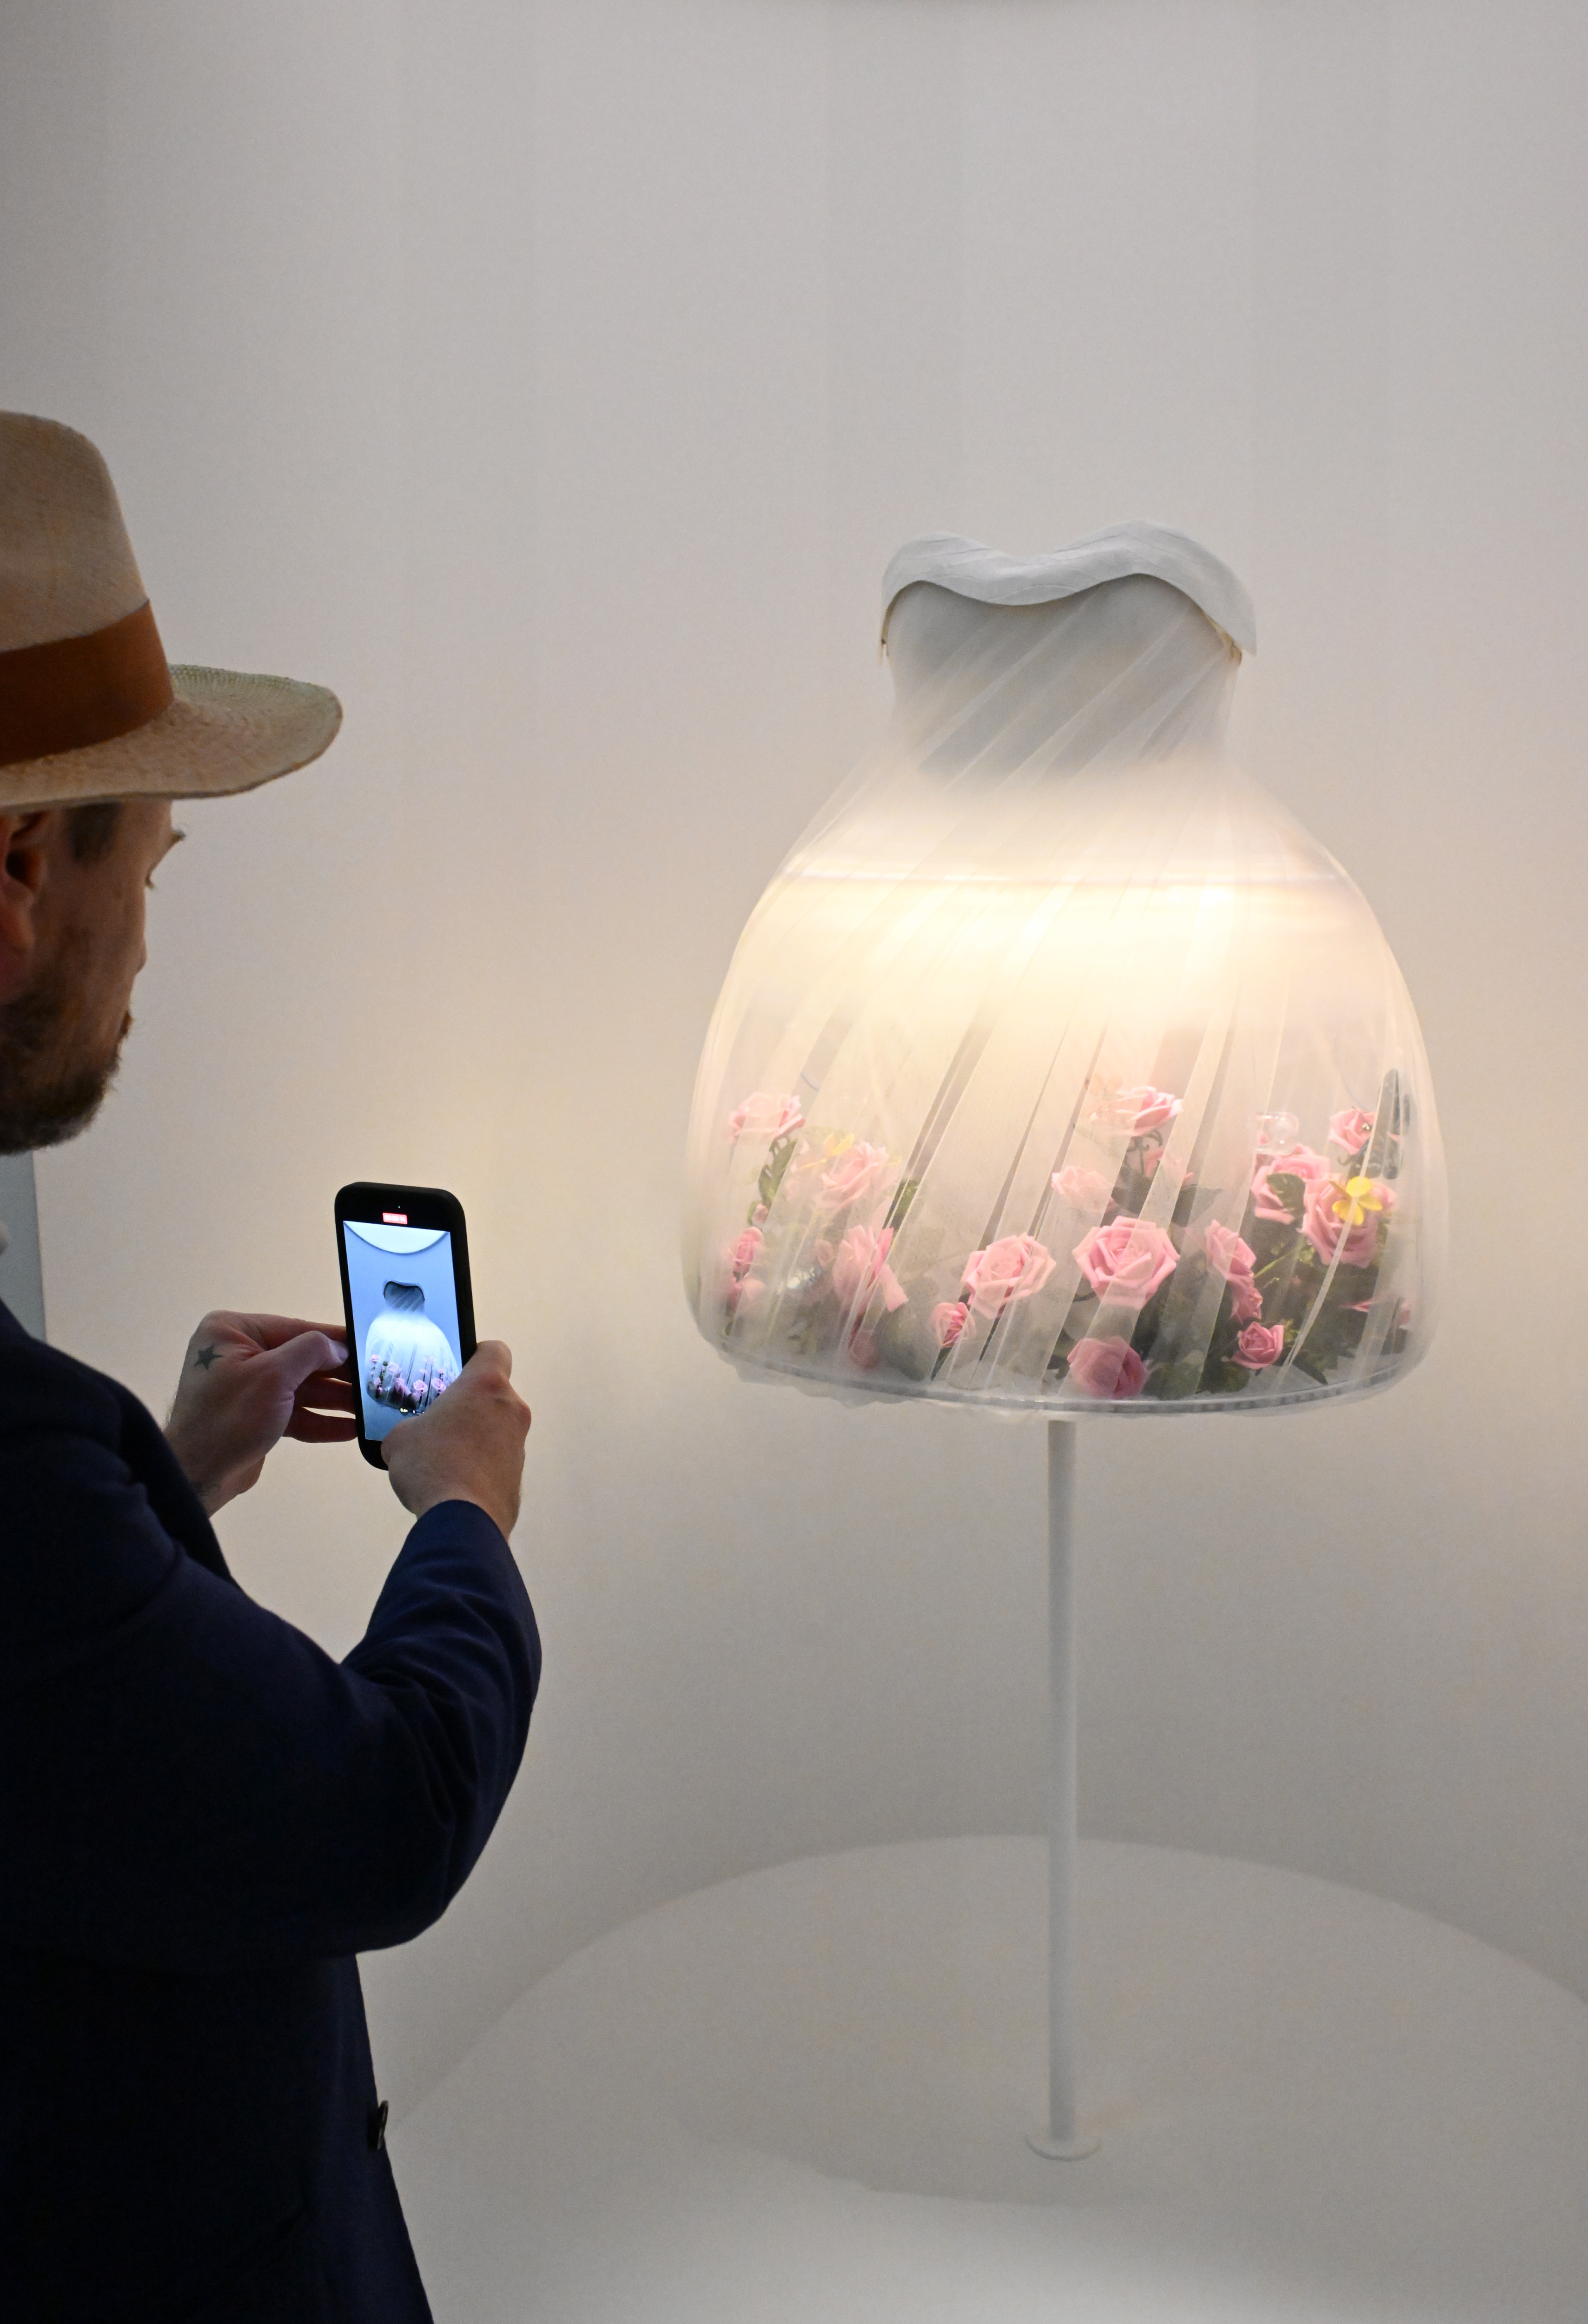 Person taking a photo of a lamp with a floral design inside the shade